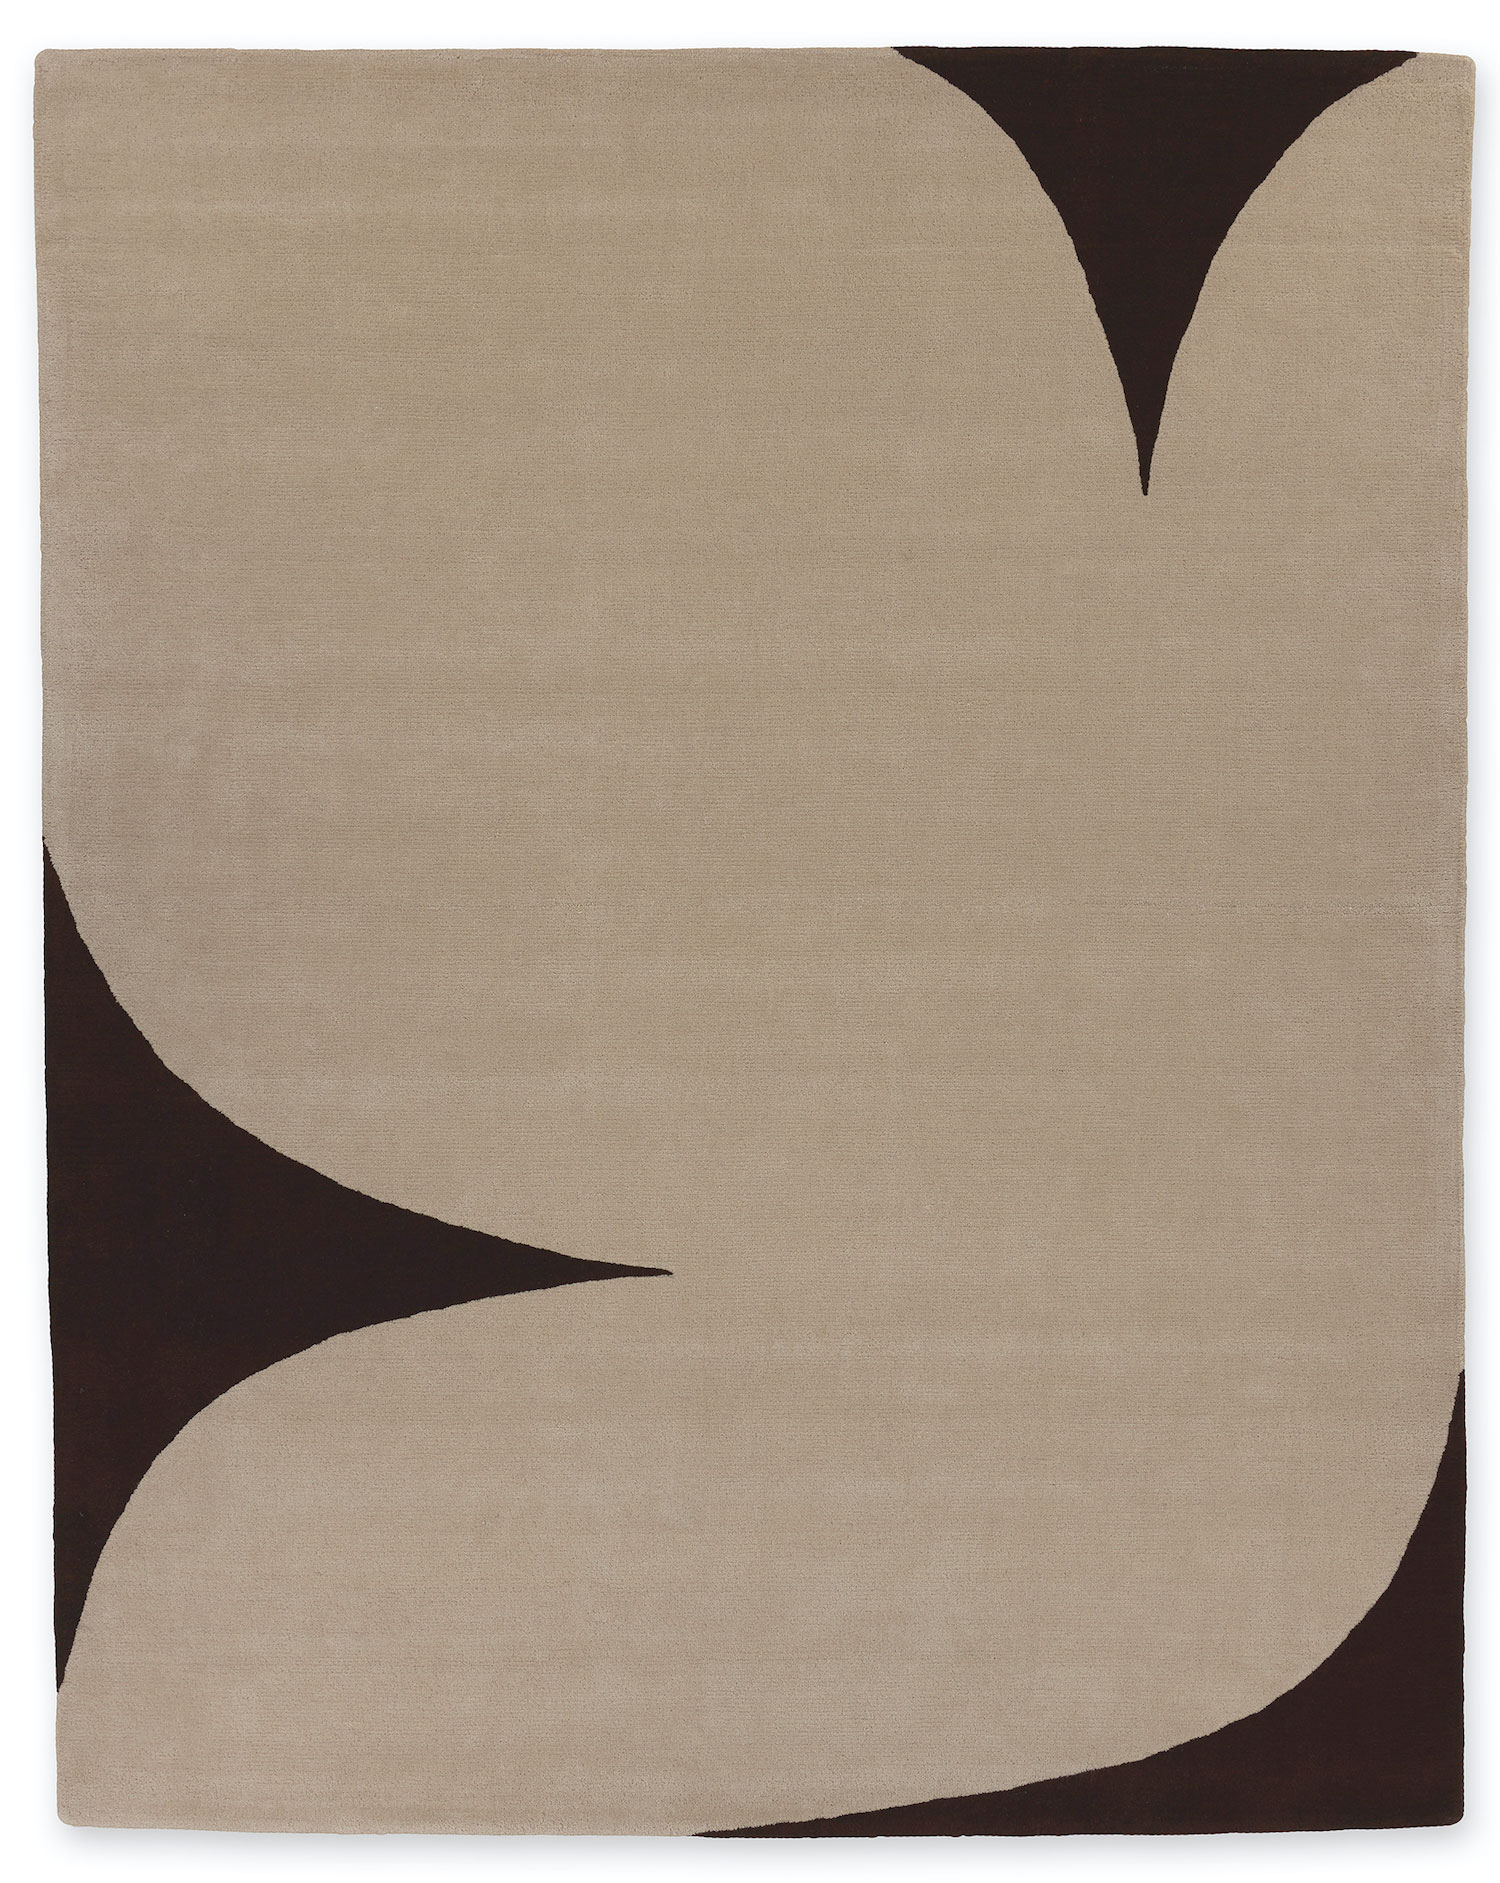 A tan and dark brown, hand tufted area rug called, Dove Moonlight by Angela Adams